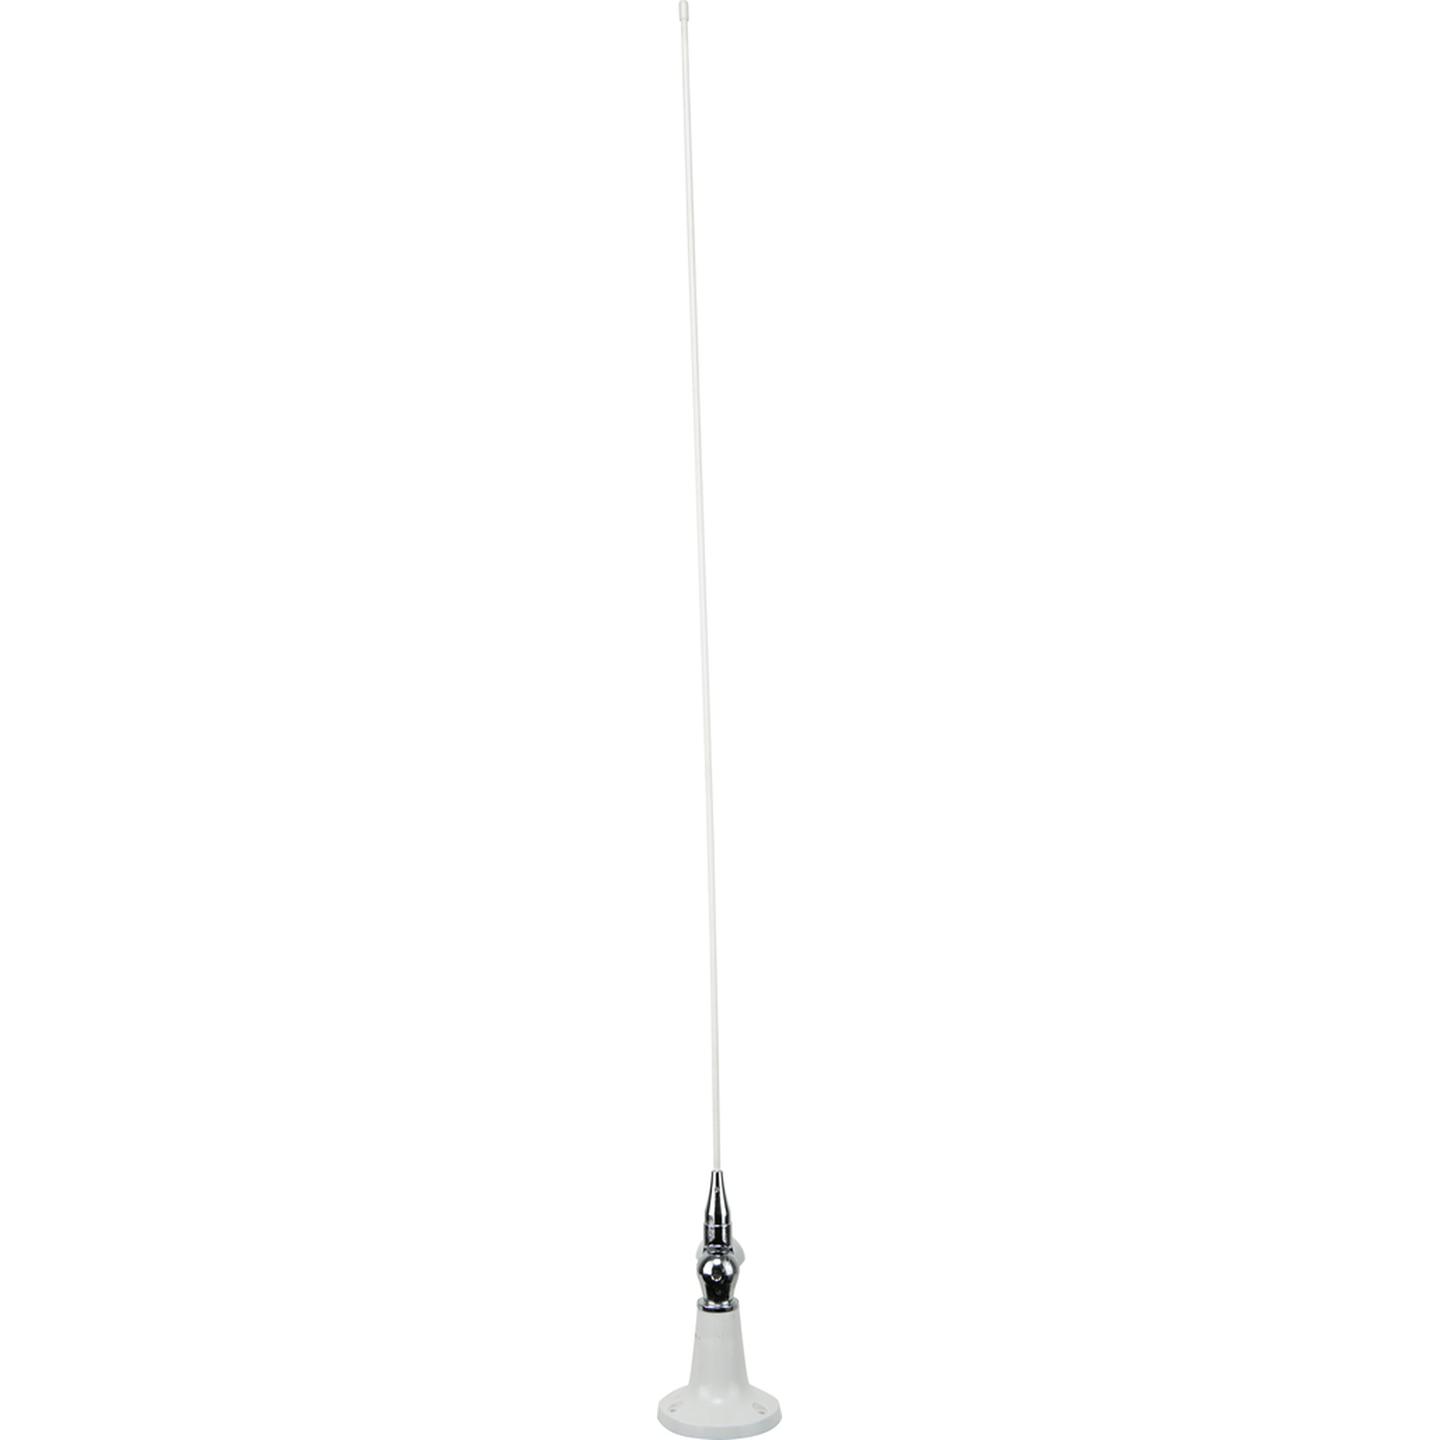 GME 820mm VHF Deck Mount Antenna Base and 3m Lead - White